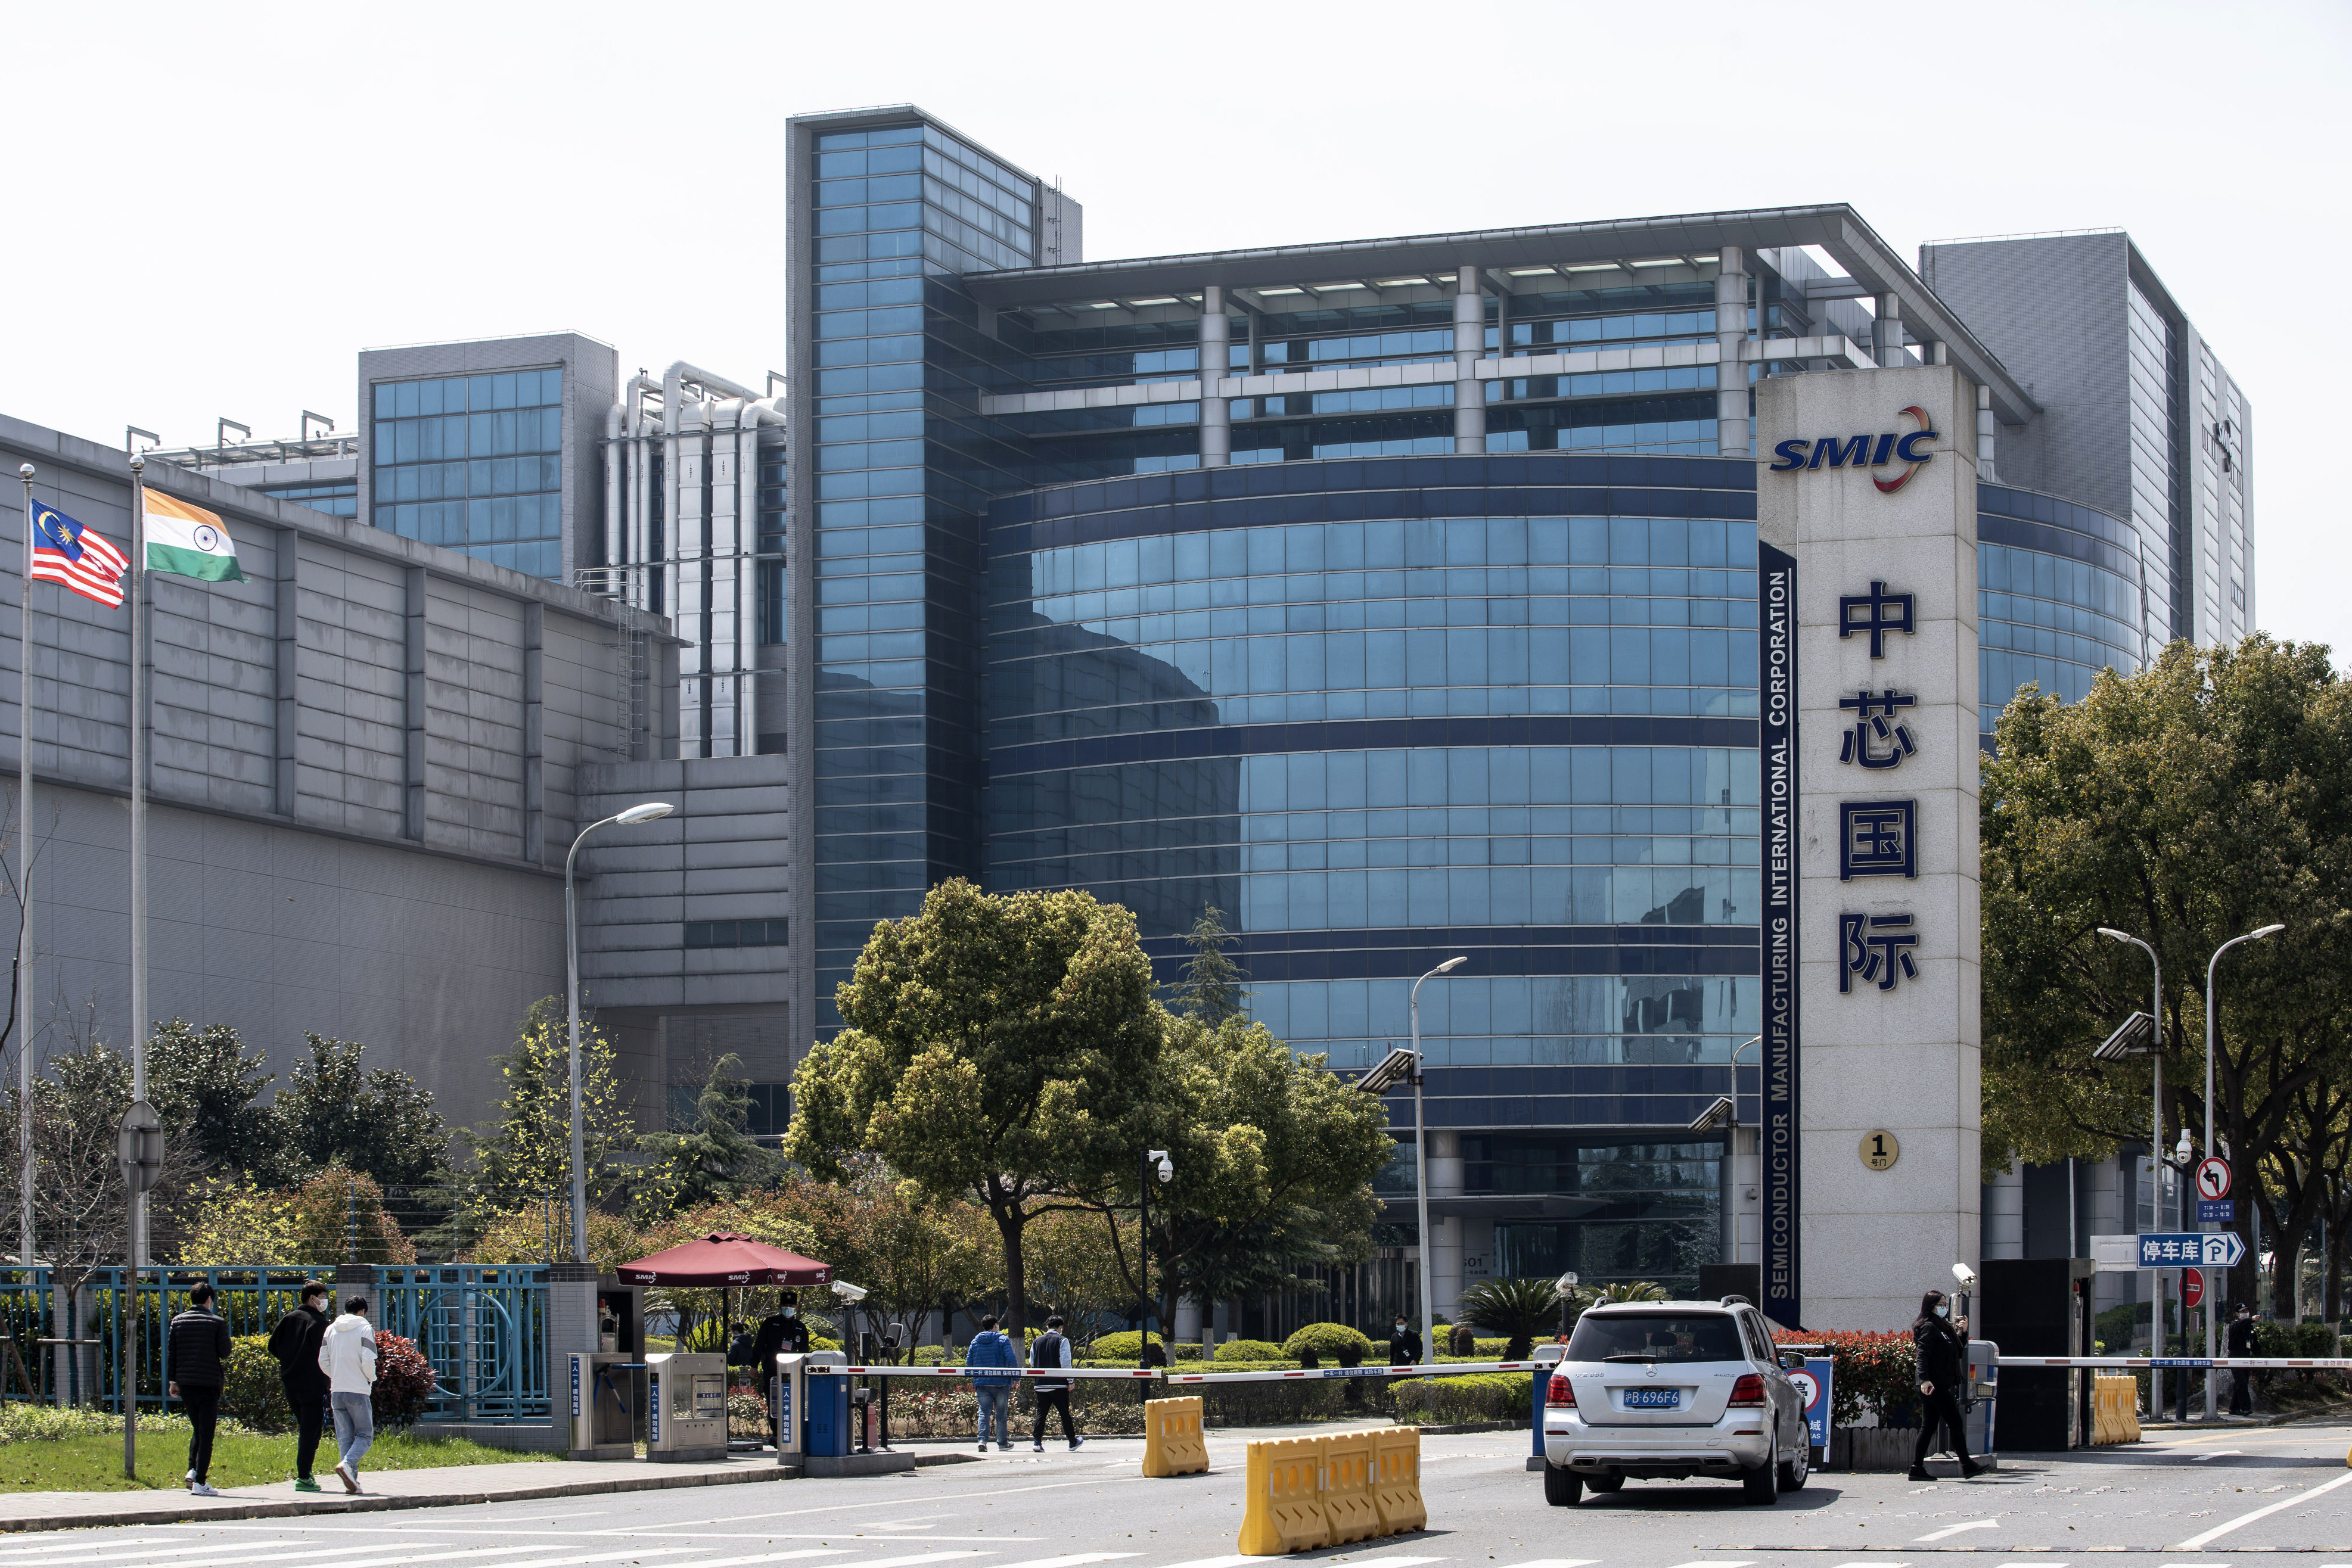 The Semiconductor Manufacturing International Corp (SMIC) headquarters in Shanghai, China, pictured on March 23, 2021. Photo: Bloomberg